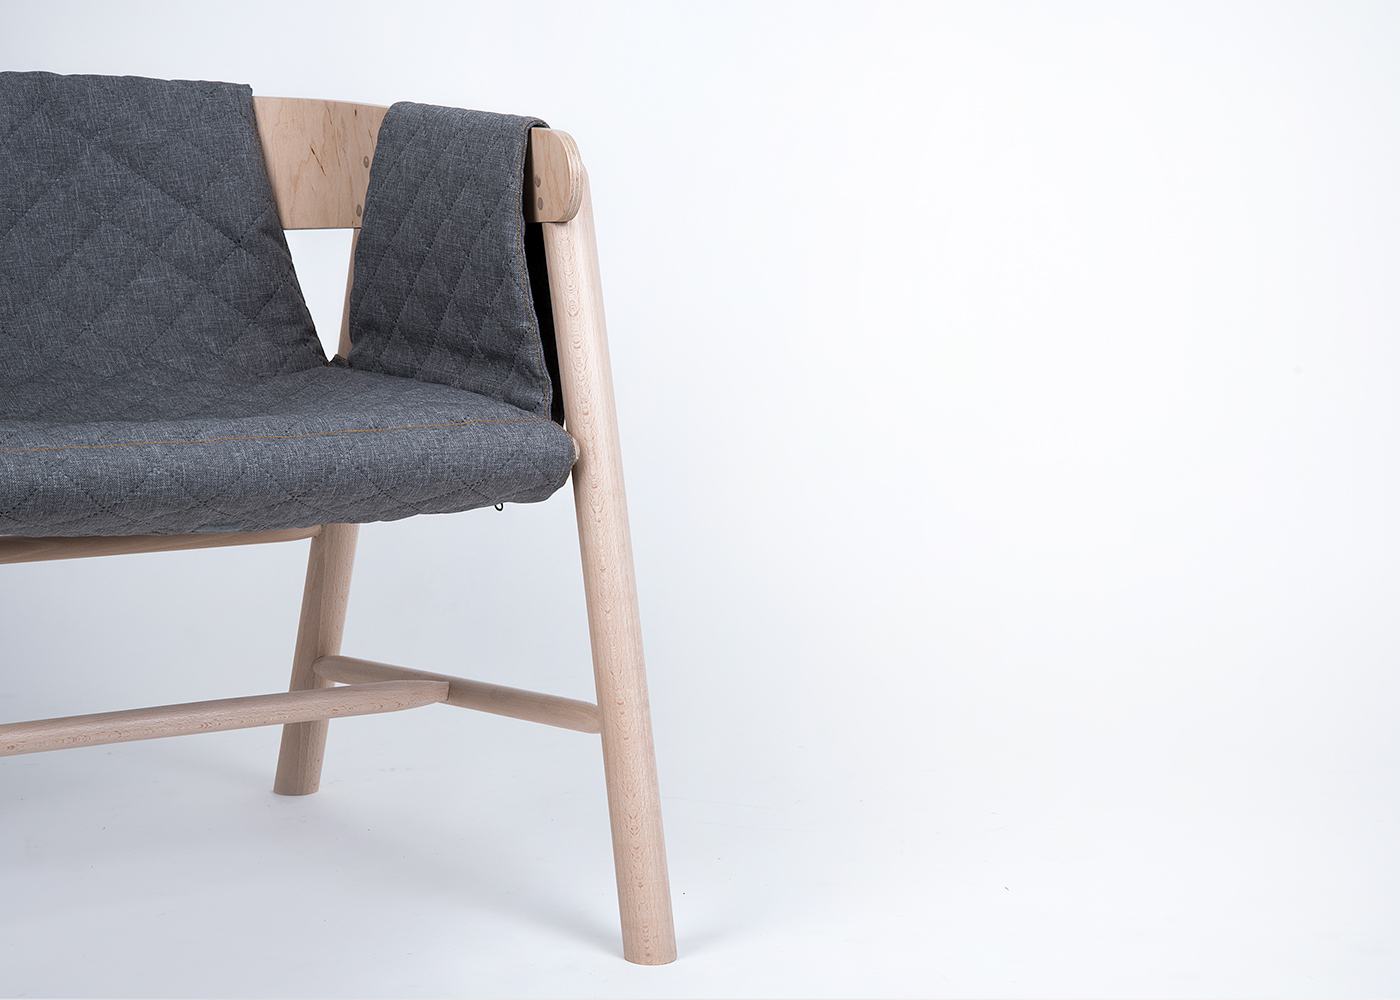 armchair upholstery natural grey Beech wood plywood furniture design